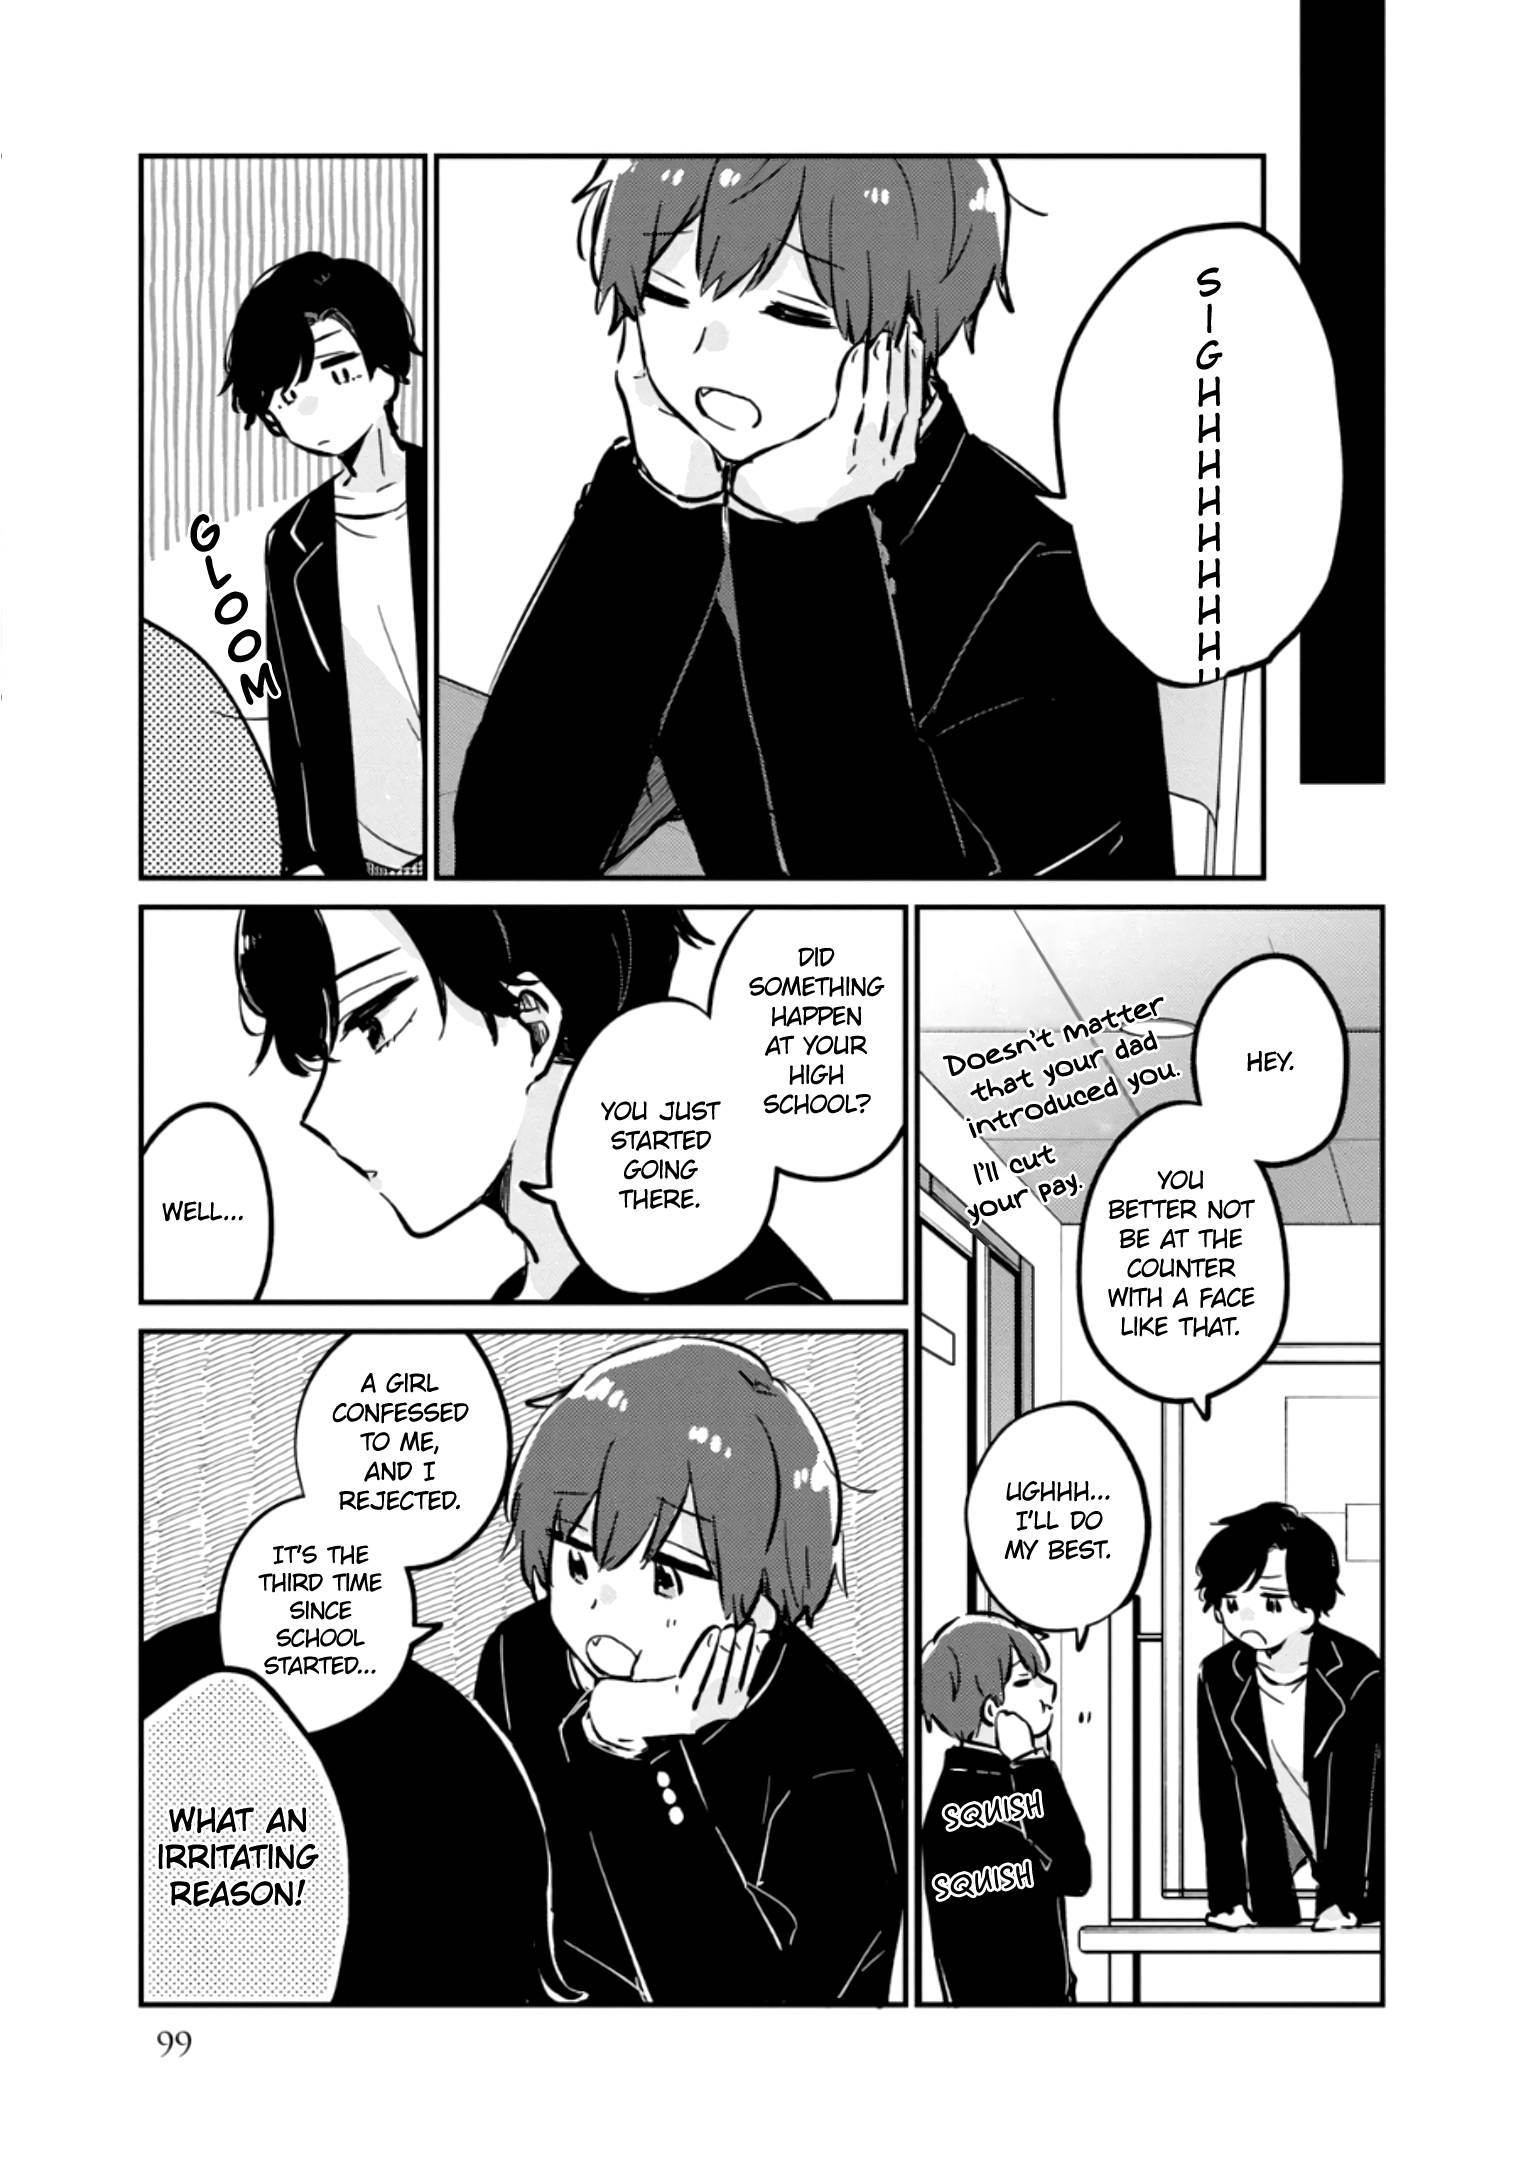 It's Not Meguro-san's First Time - chapter 37.5 - #6